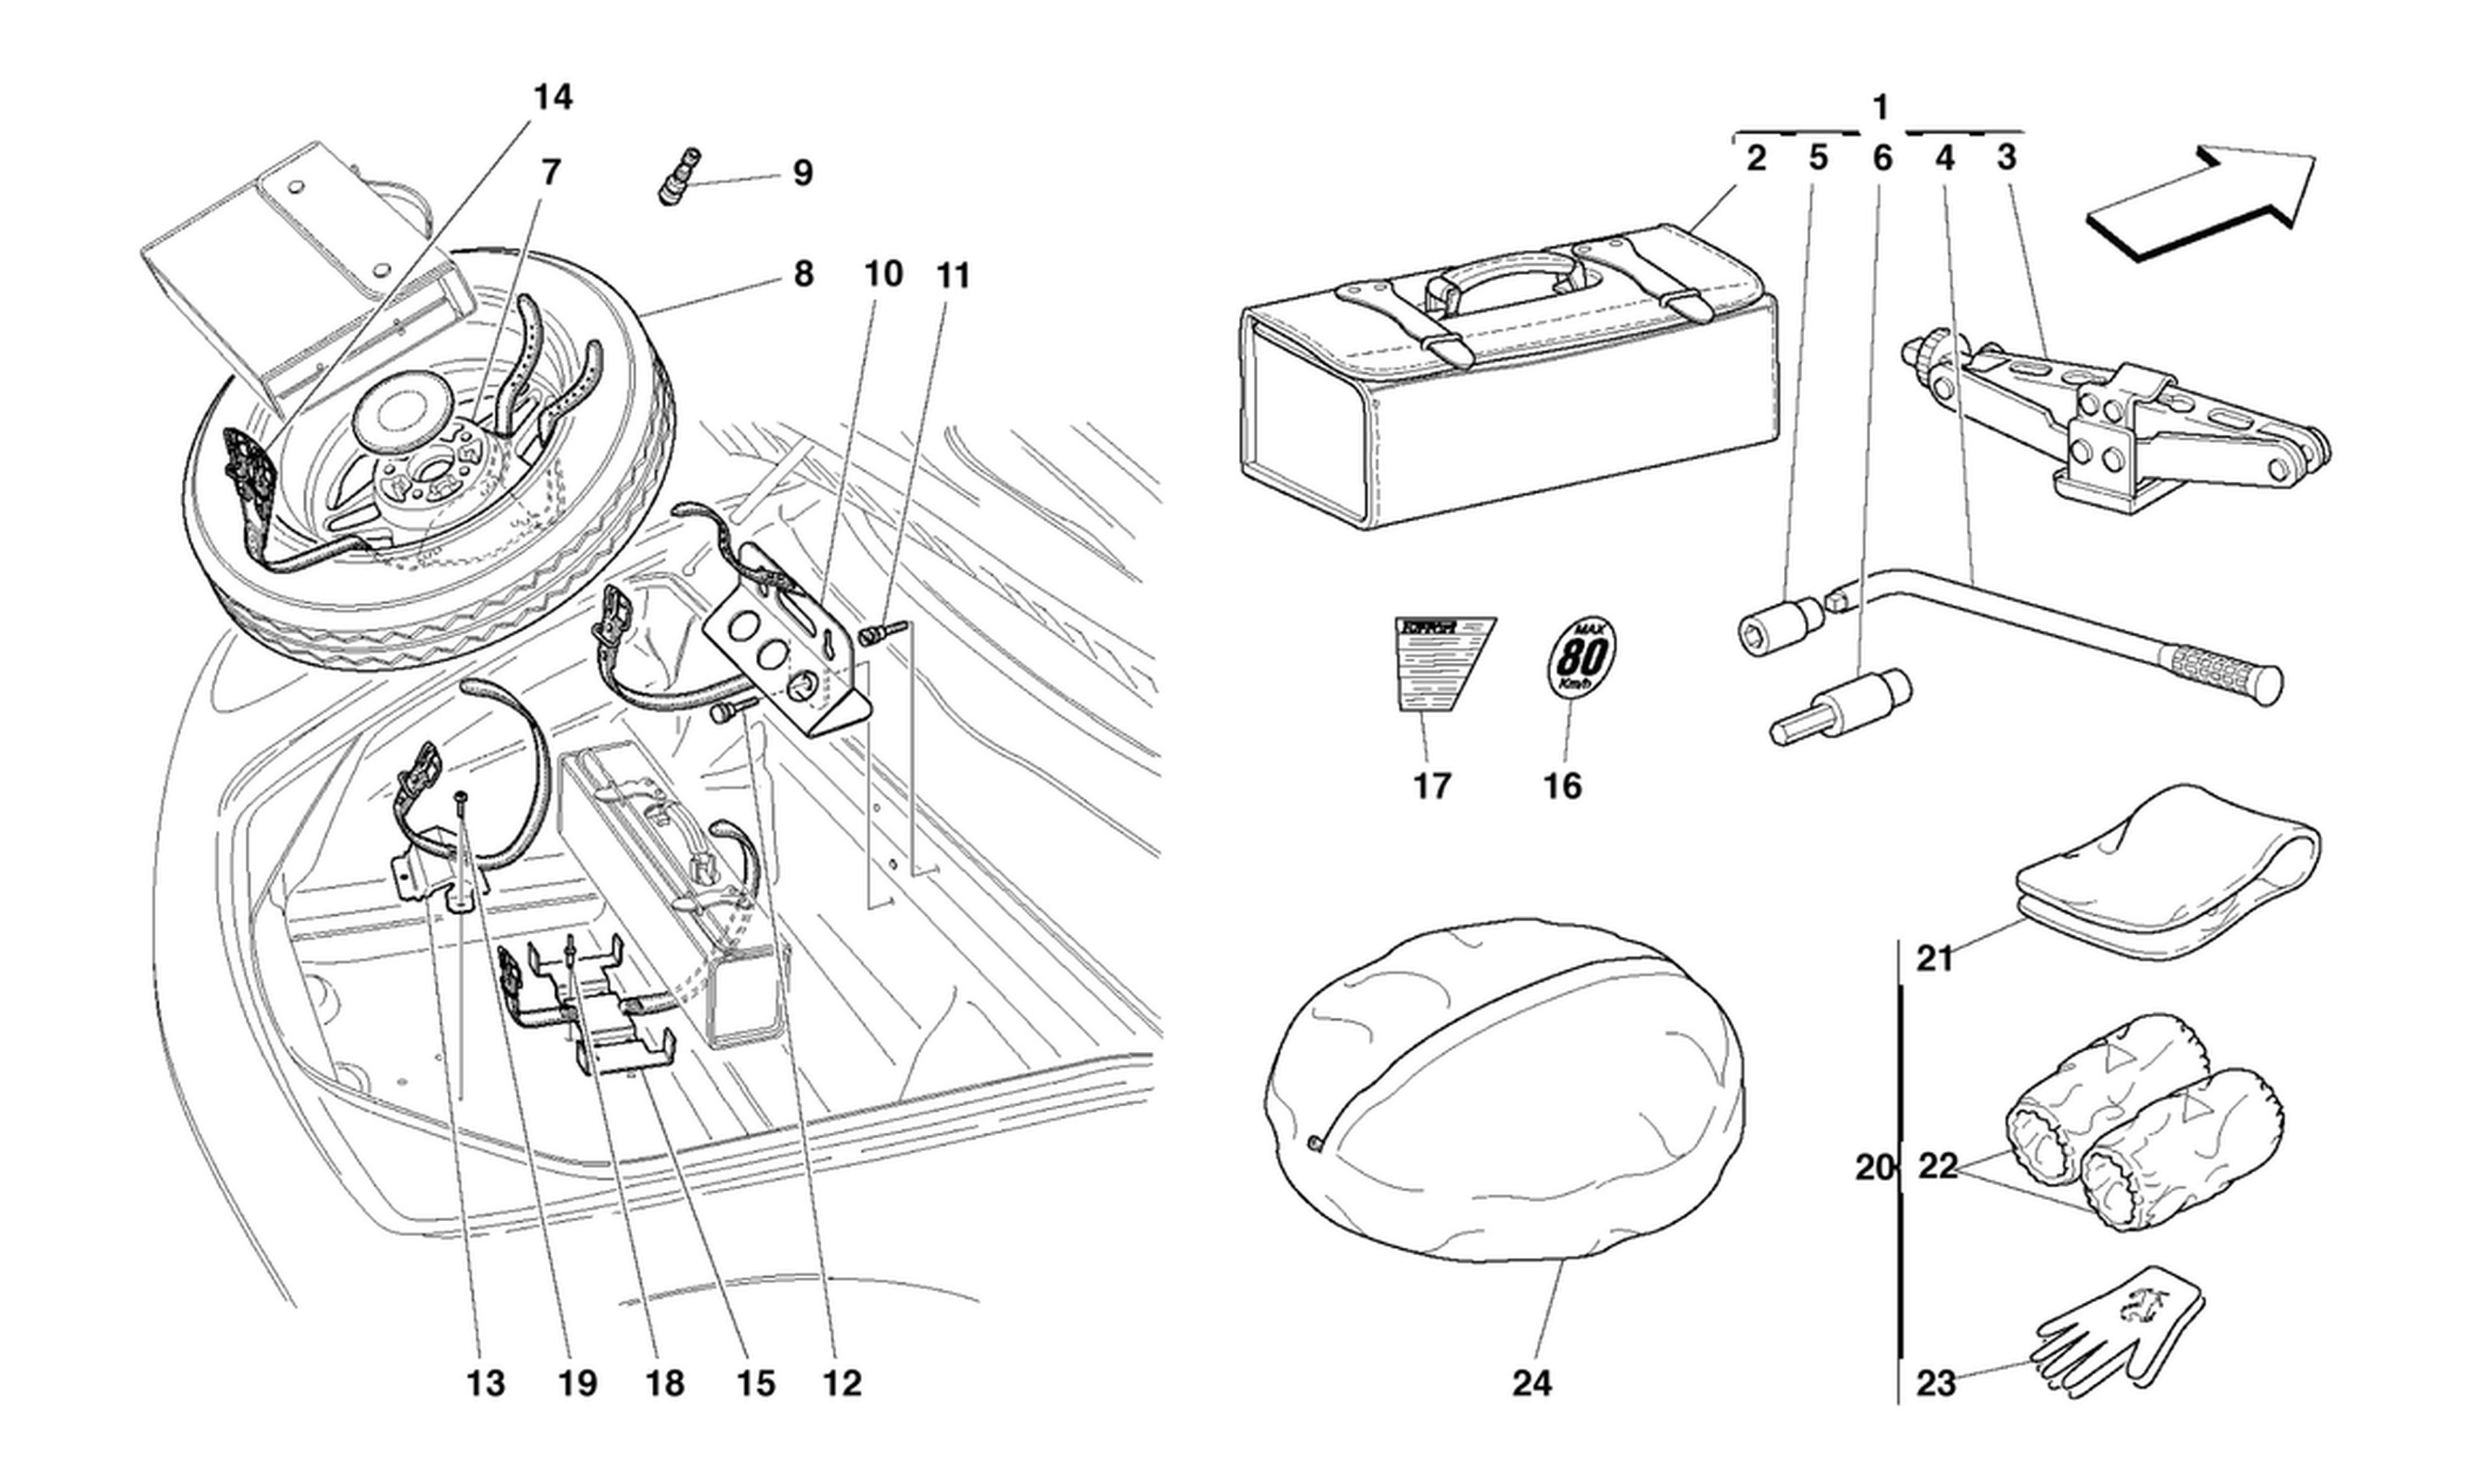 Schematic: Spare Wheel And Equipment -Optional-